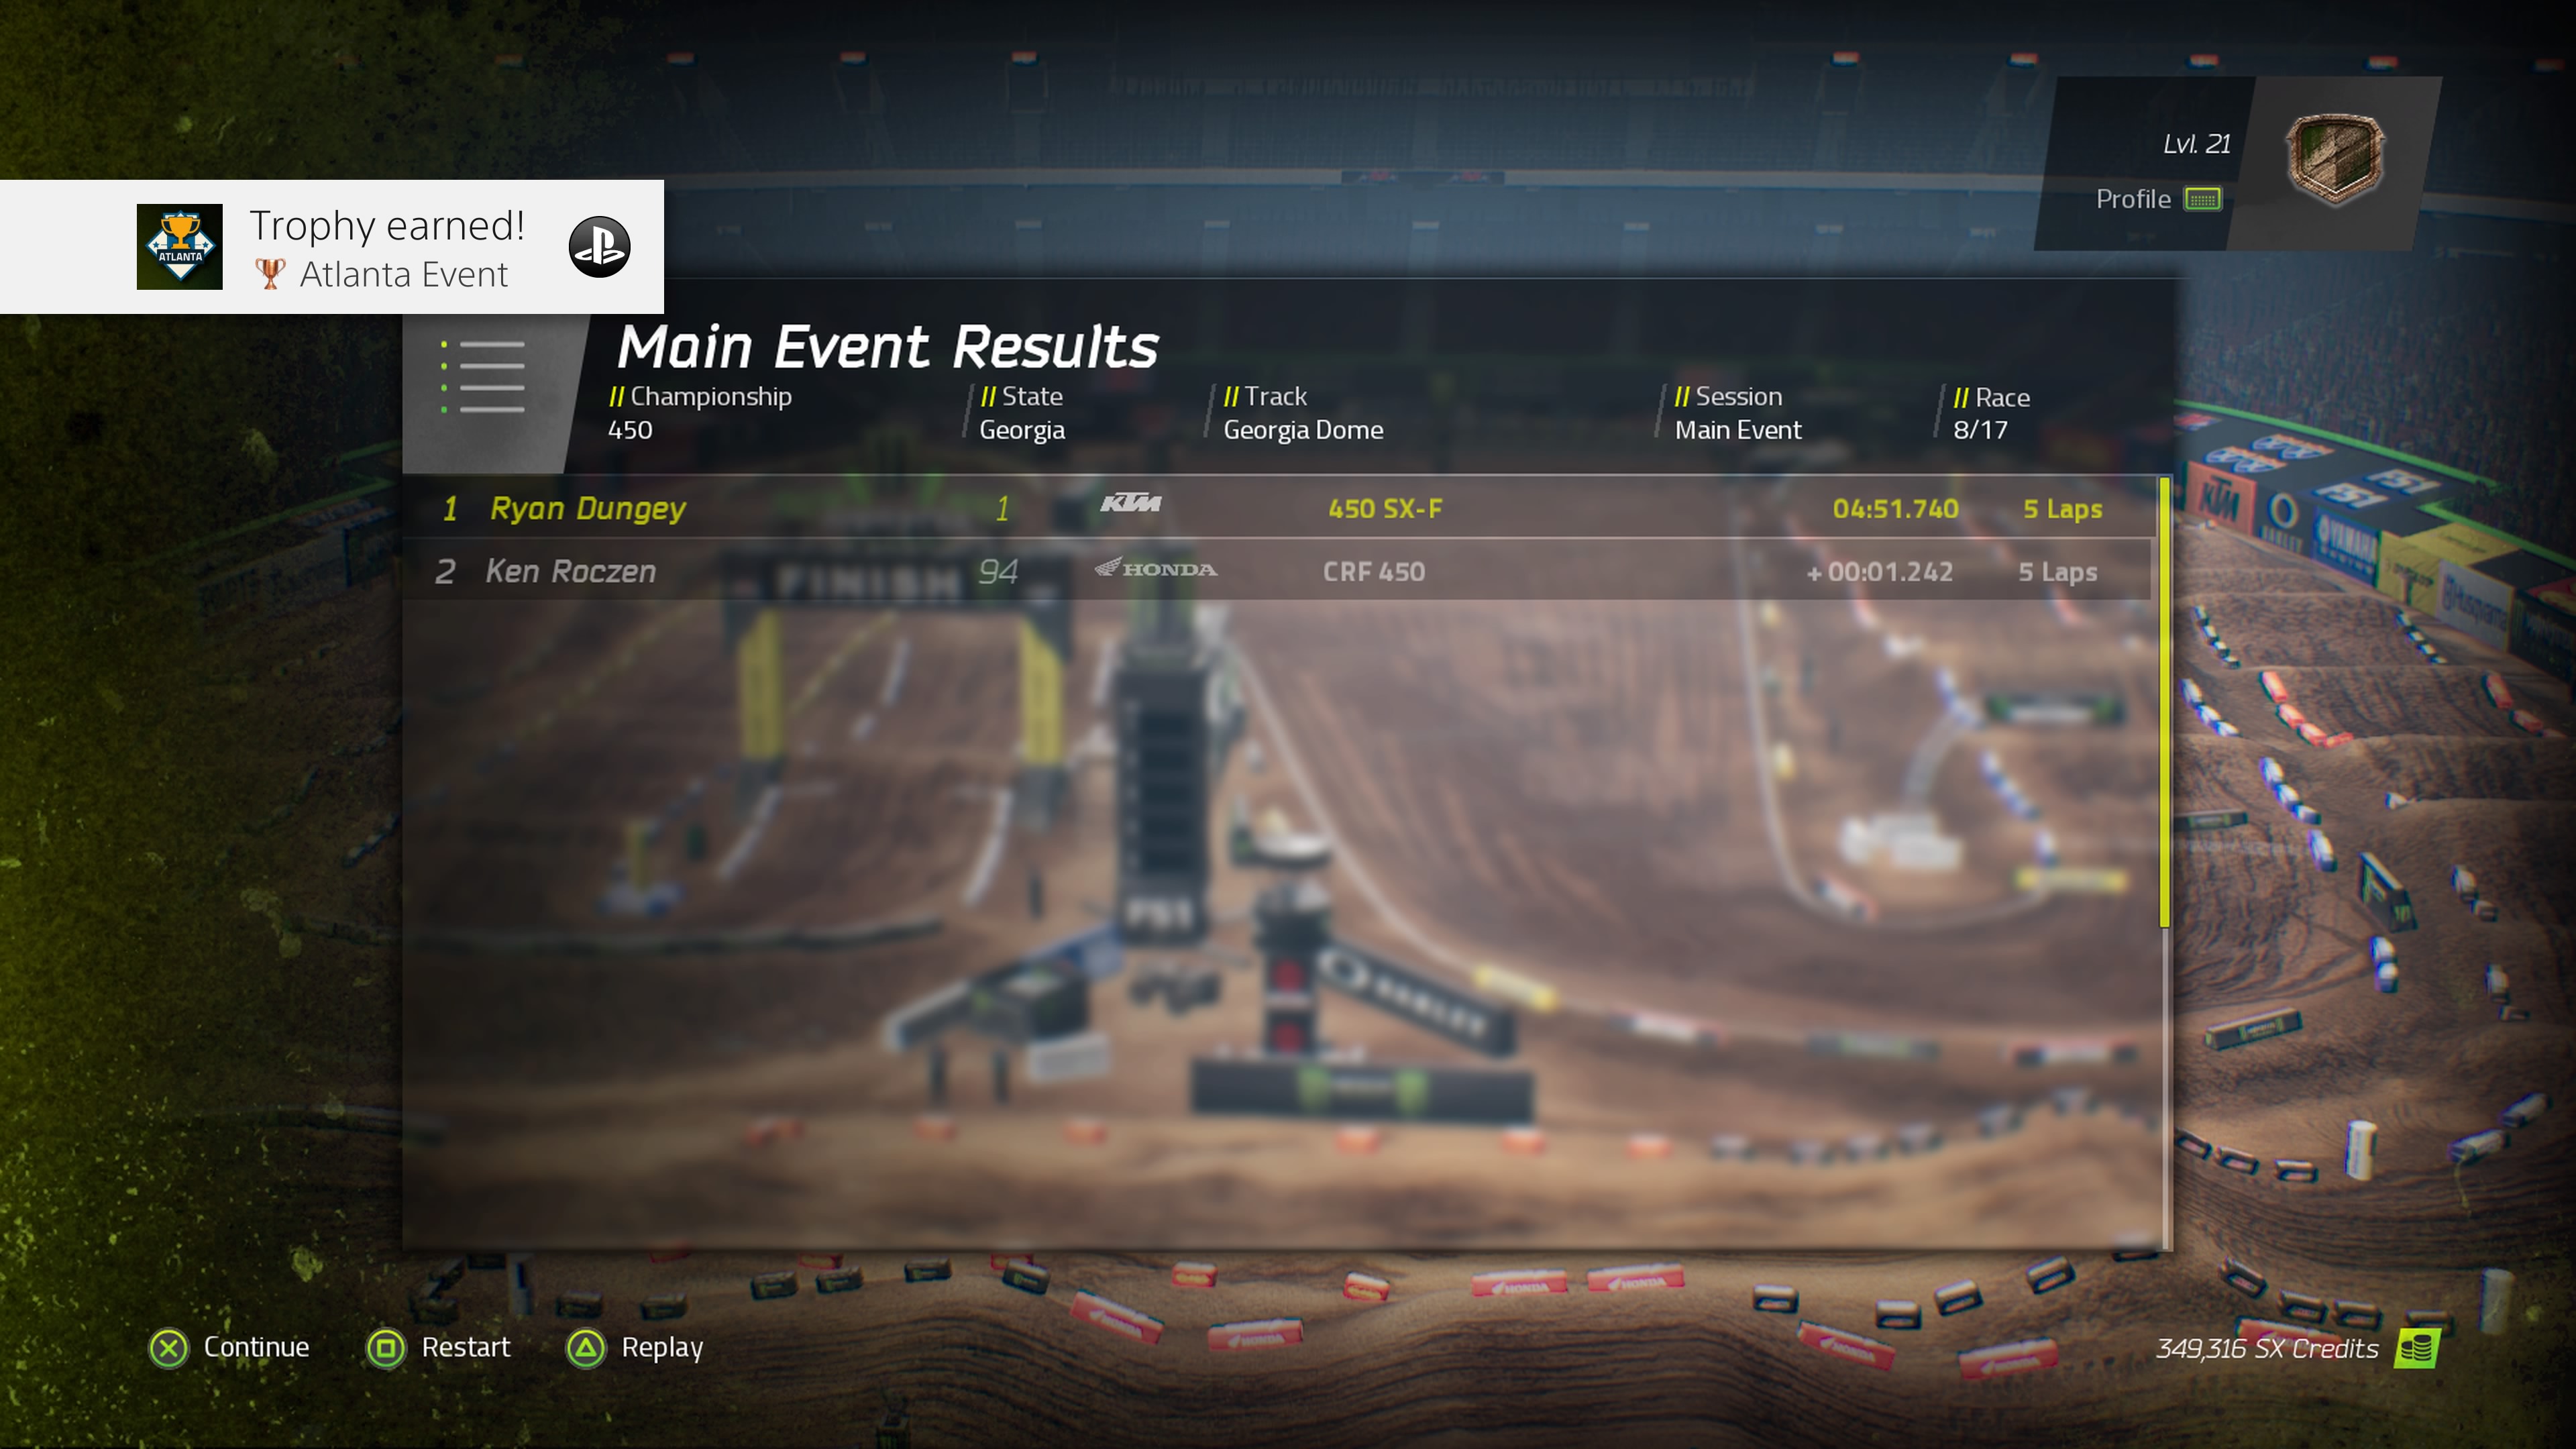 Monster Energy Supercross - The Official Videogame